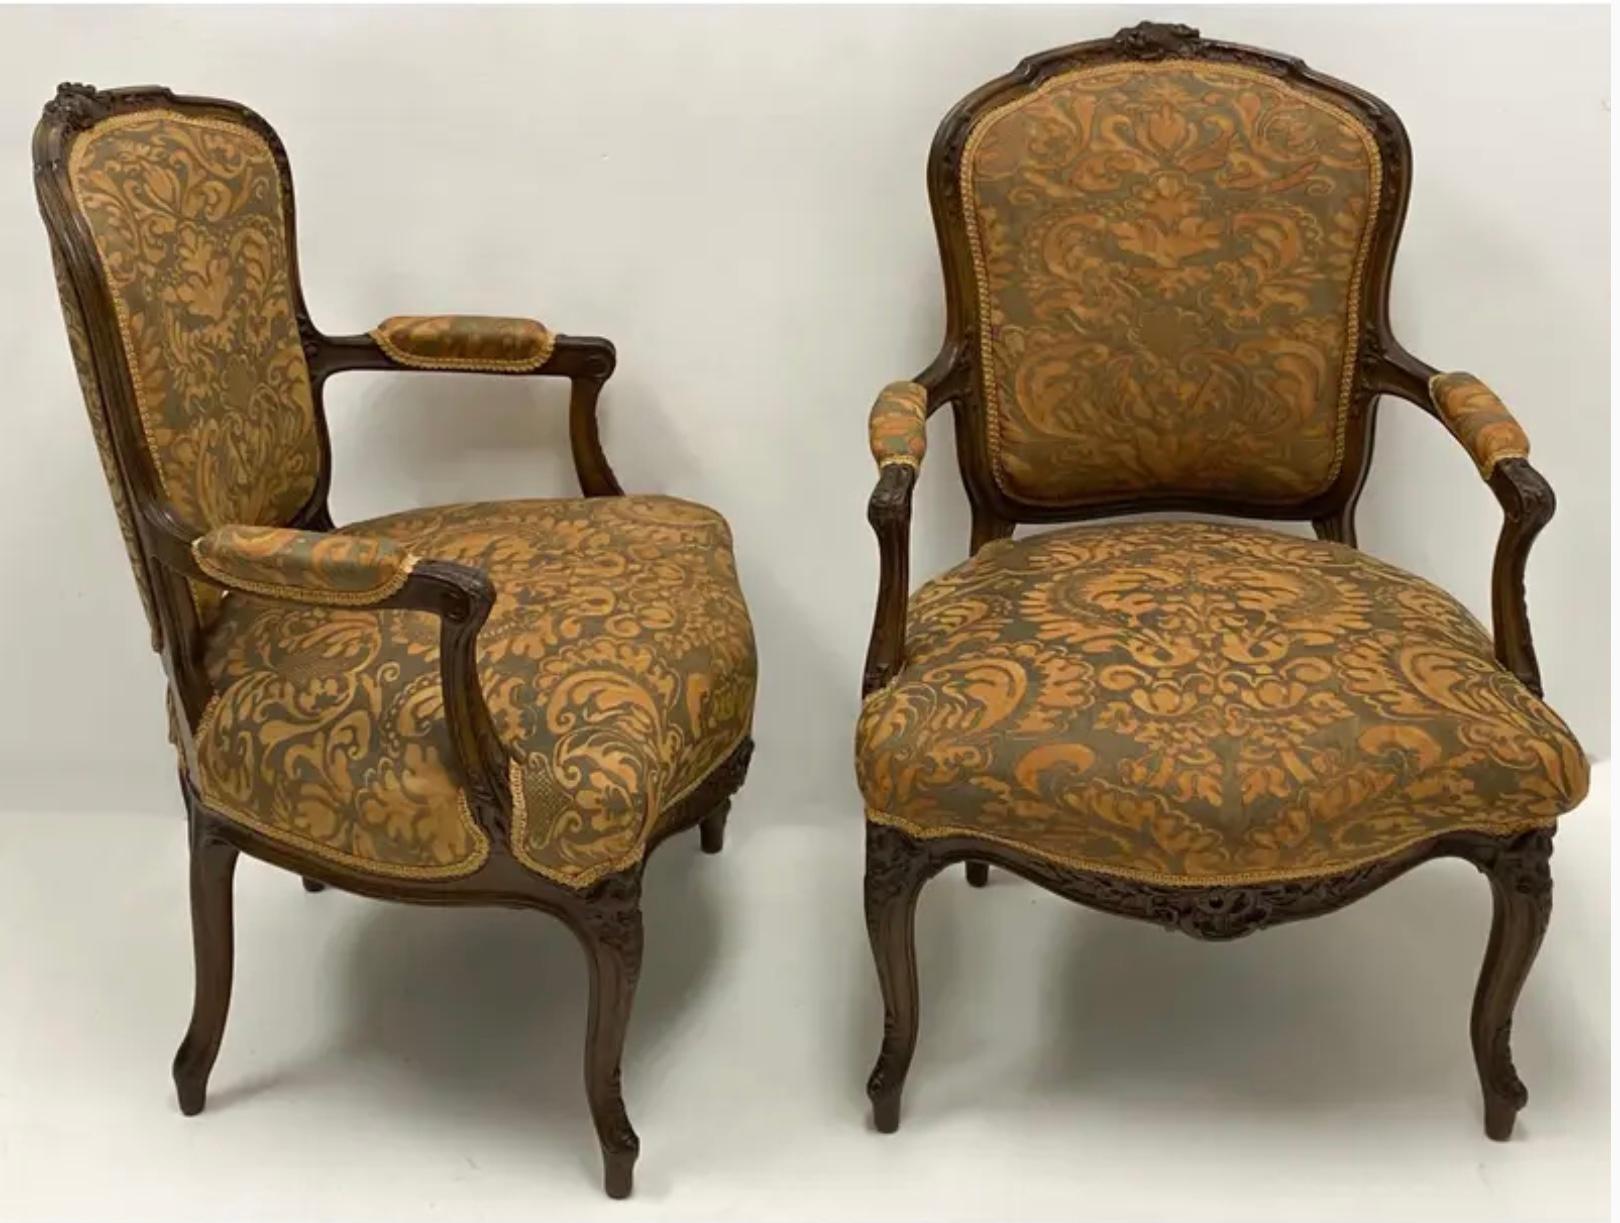 This is a pair of carved 19th-C. French bergere chairs in a vintage silk Fortuny fabric. The frames are carved walnut. The fabric is vintage and in good condition.